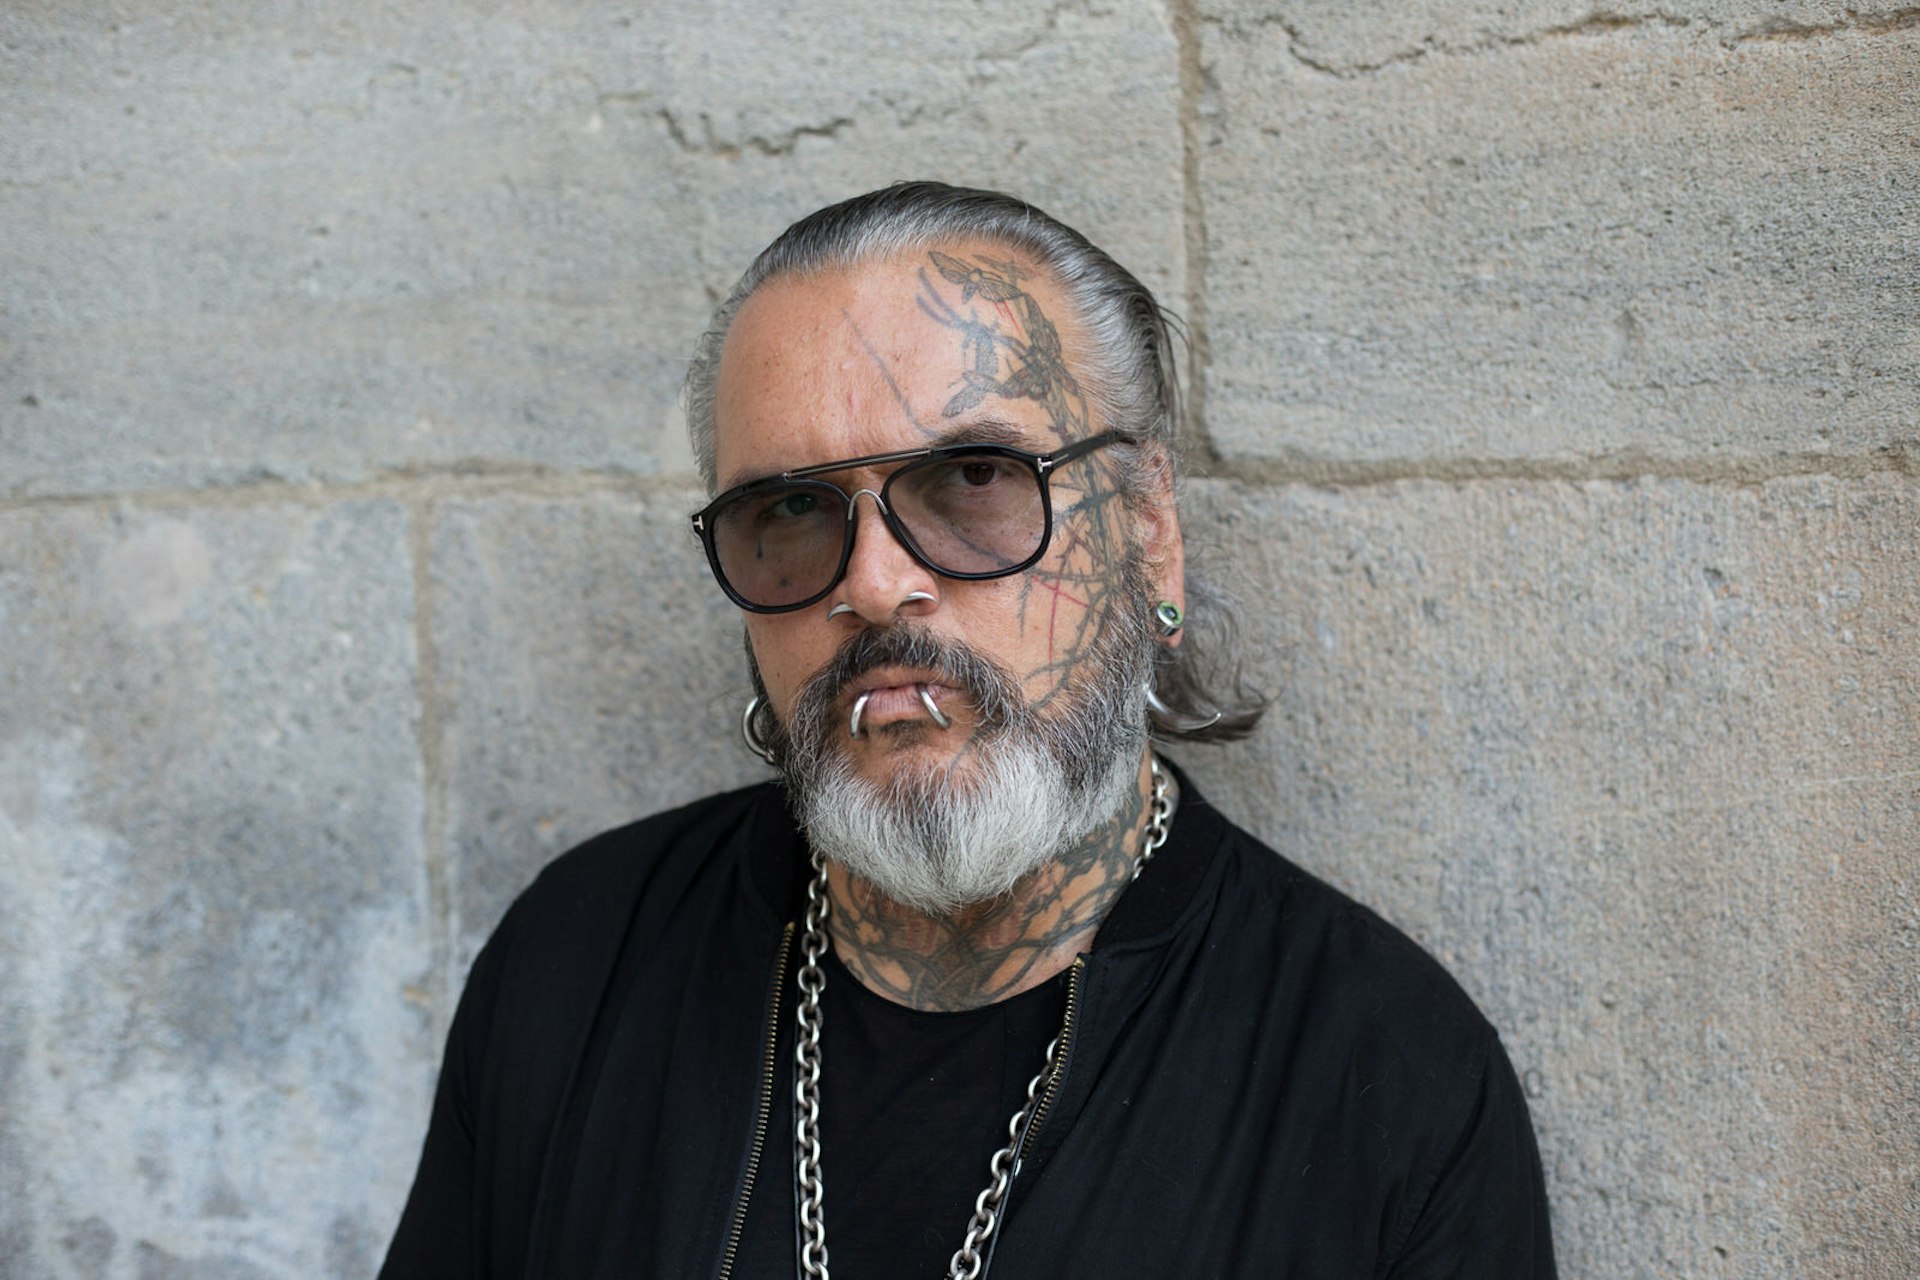 Berlin clubs - Berghain doorman Sven Marquardt poses at Volksbuehne theater in Berlin, Germany. Sven is a legendary and feared doorman with facial tattoos and piercings. He wears dark sunglasses, a black t-shirt, a heavy silver chain. He has a grey beard and slicked-back grey hair